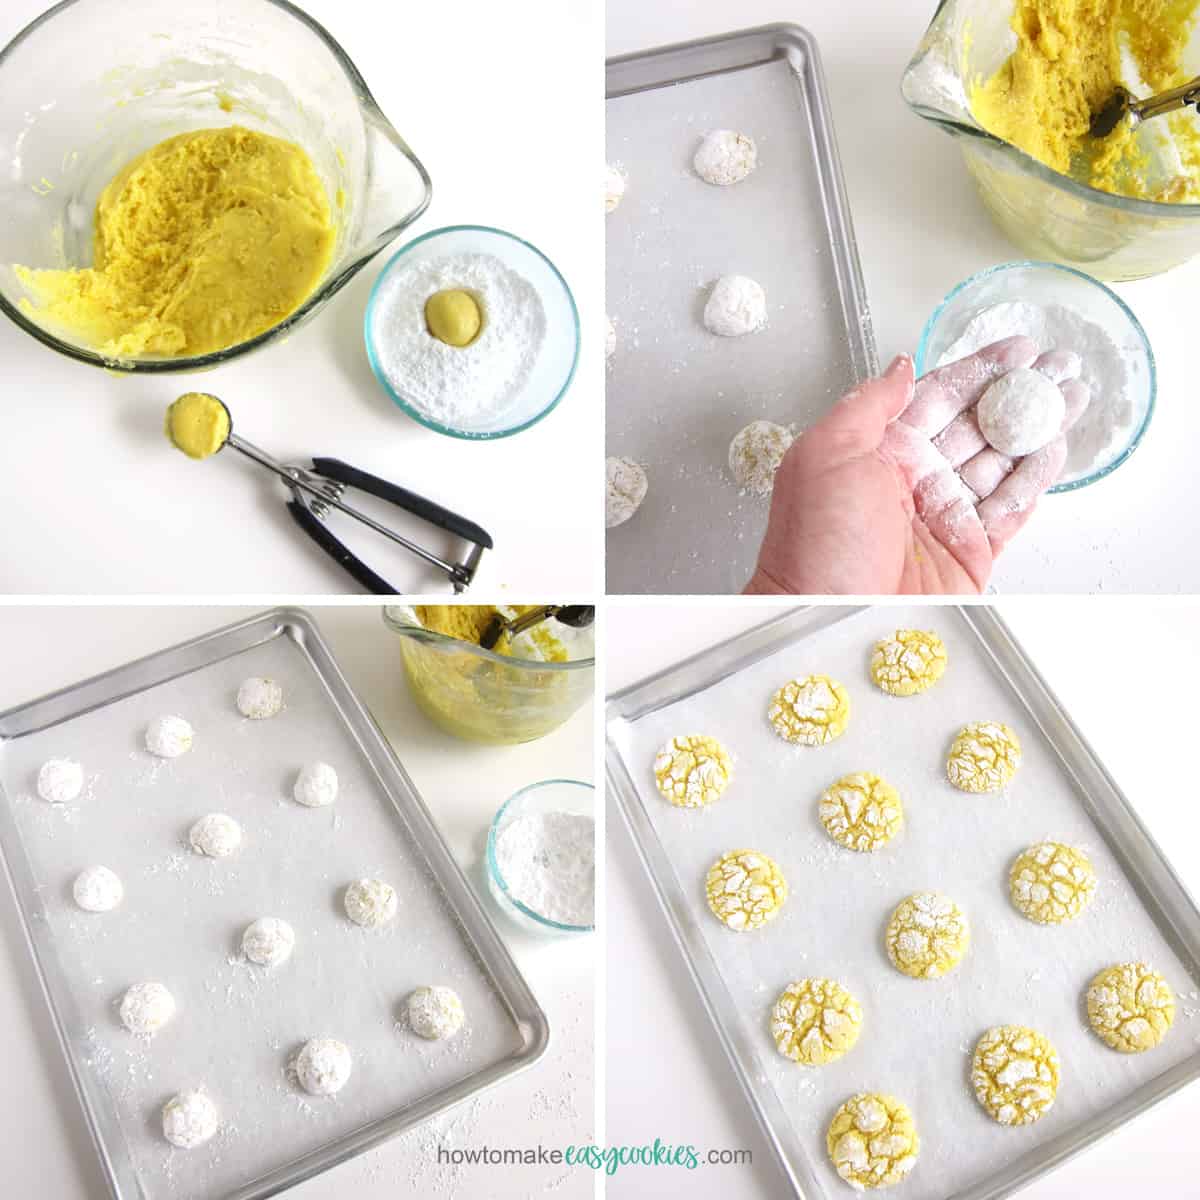 roll lemon cake mix cookie dough in powdered sugar then bake until crackled